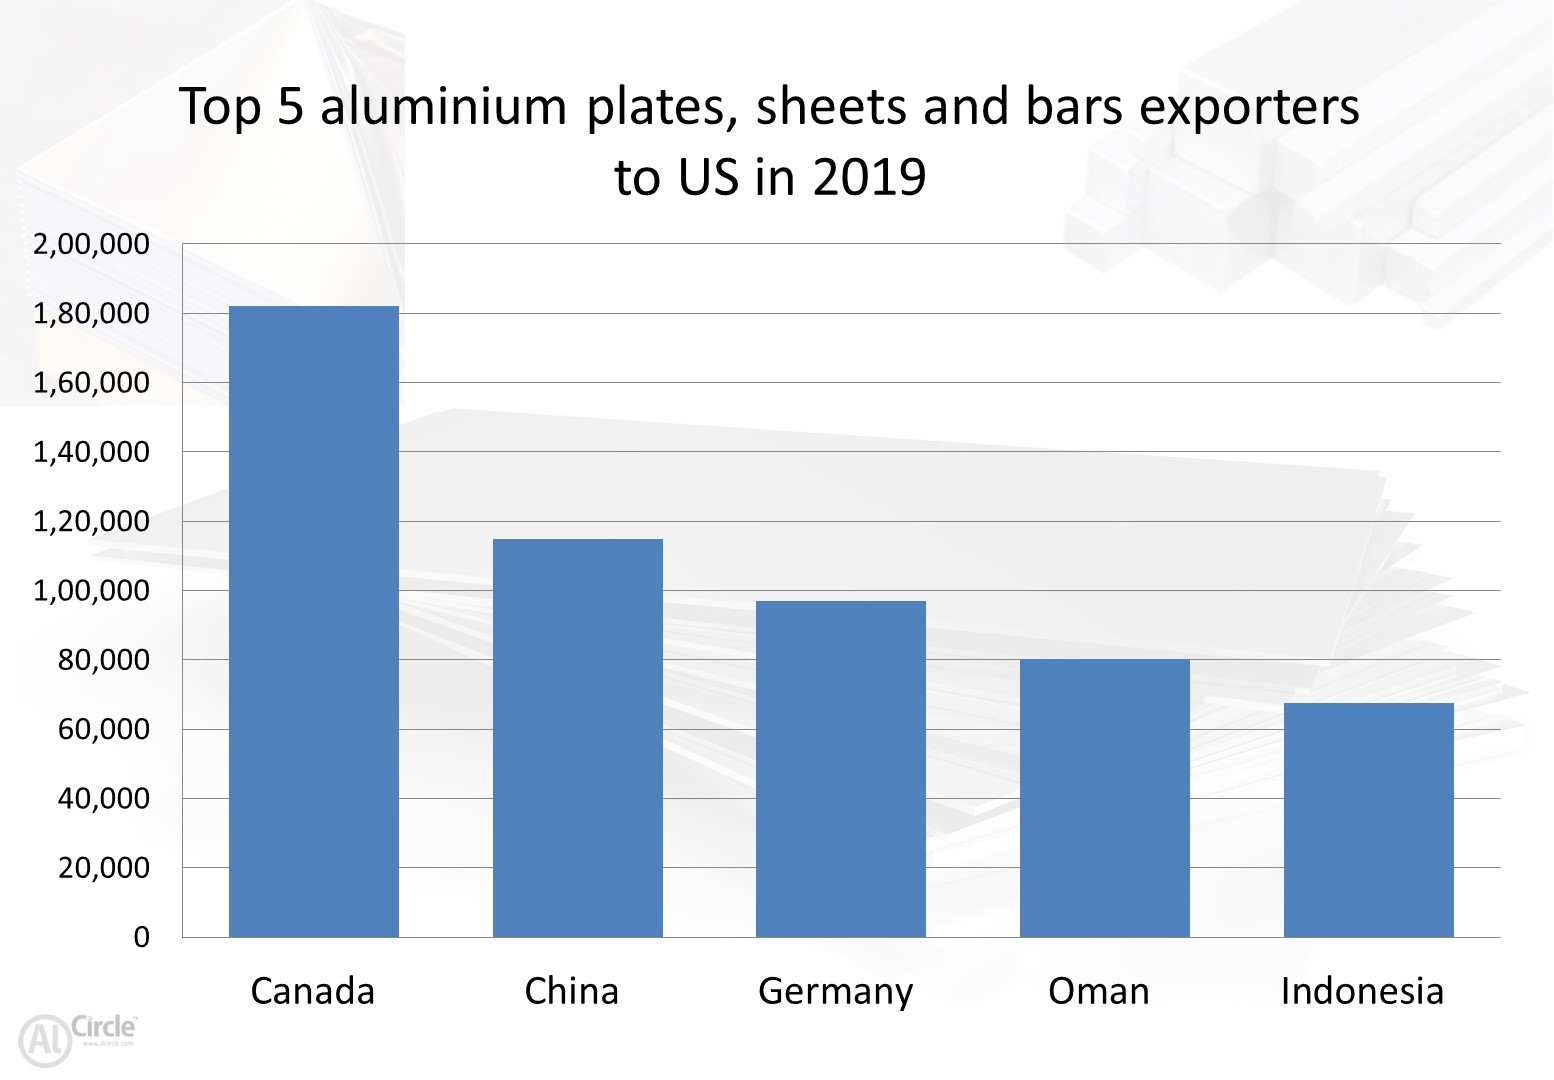 Top 5 aluminium plates, sheets and bars exporters to the US in 2019